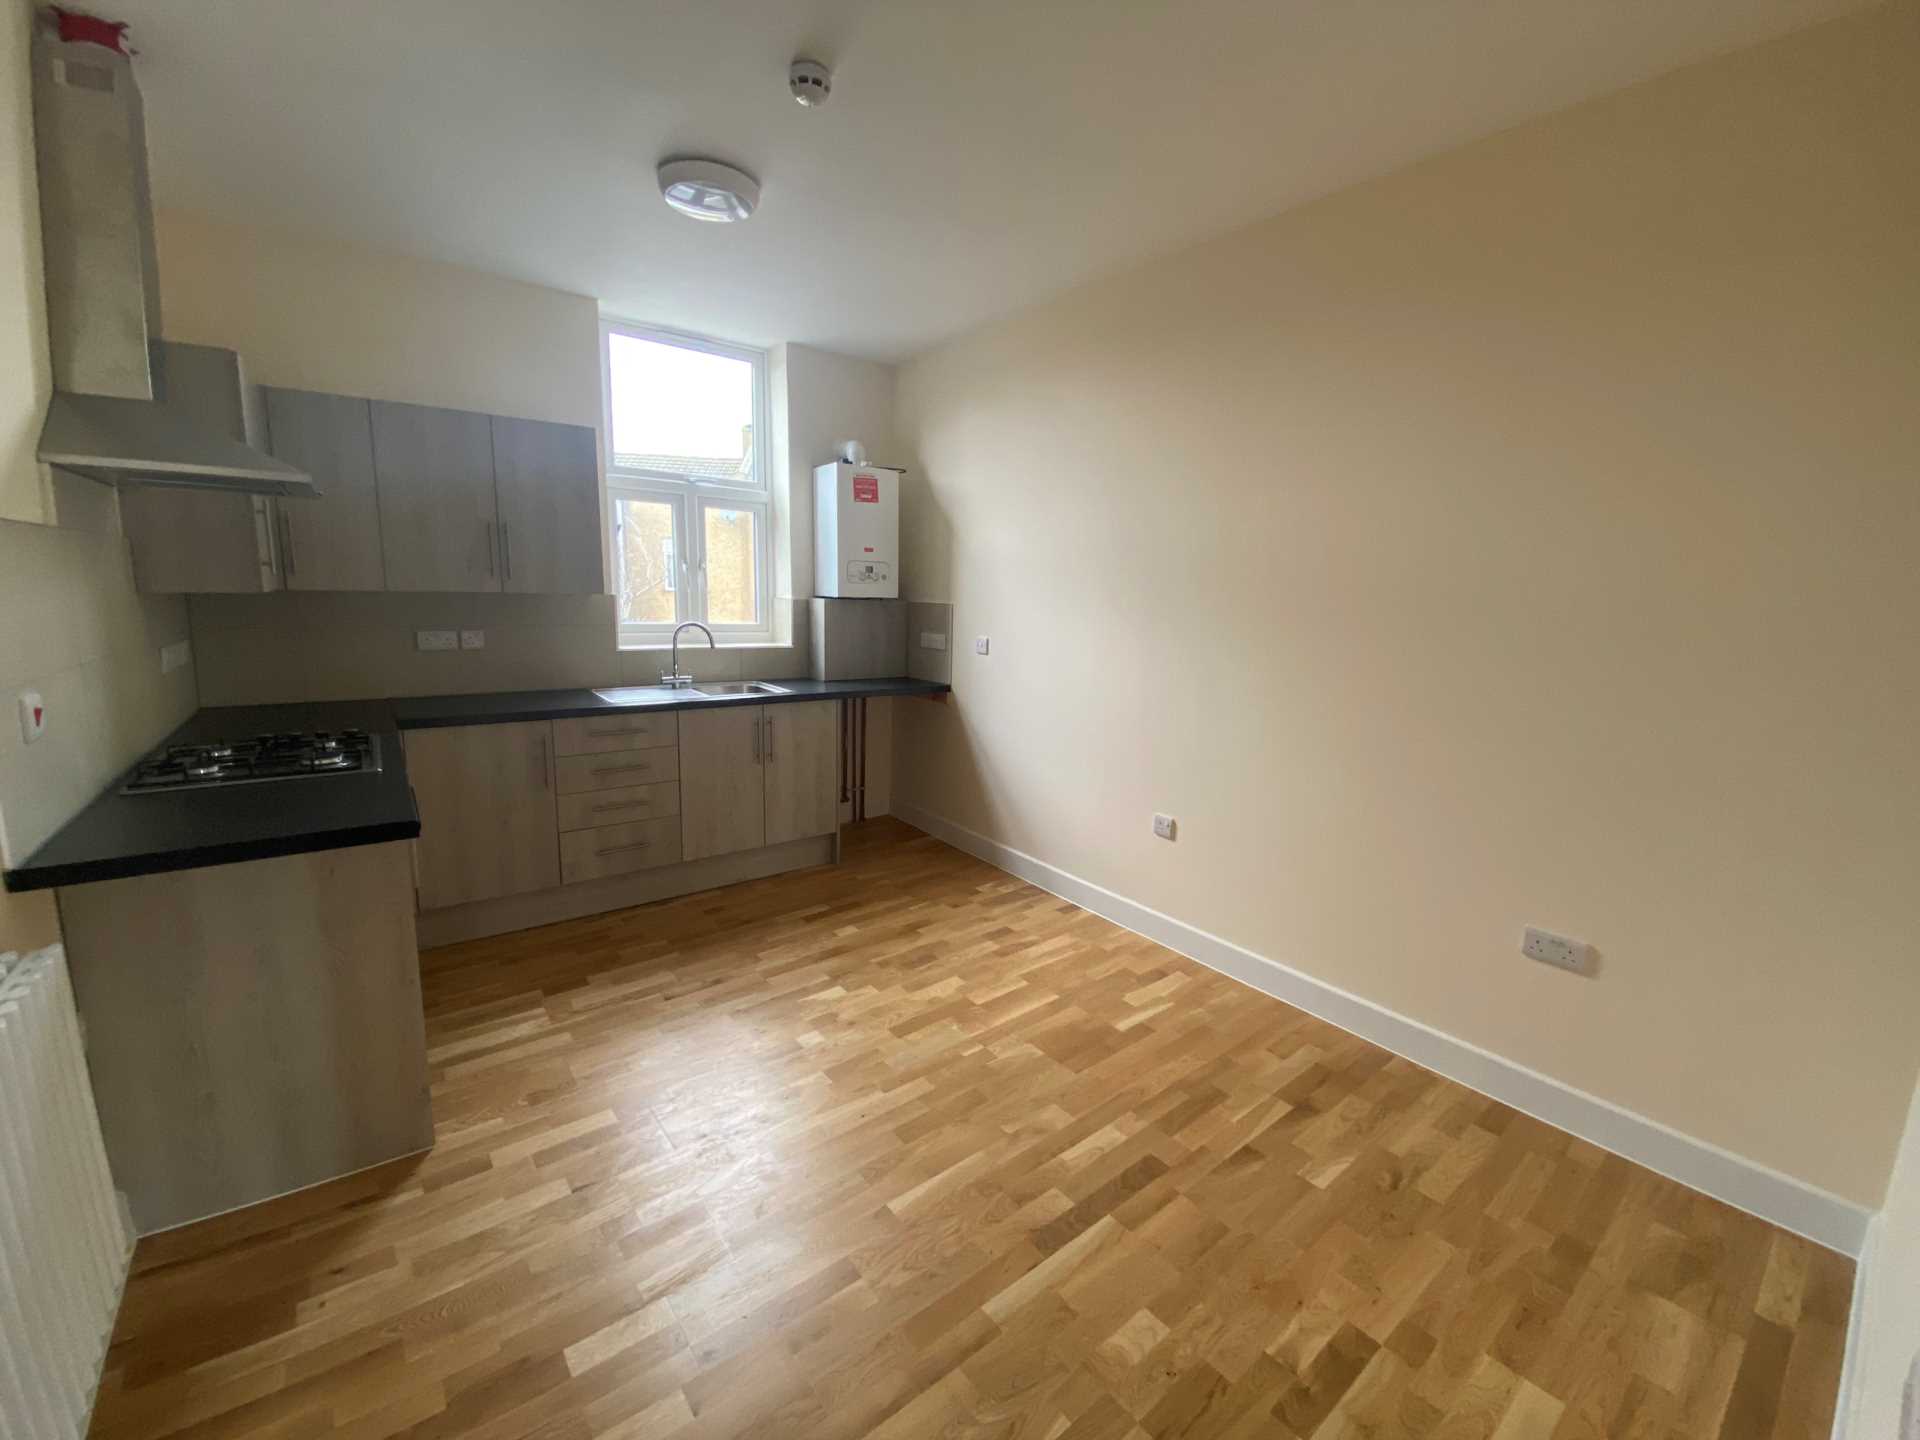 2 bed Flat for rent in London. From Belvoir - Stratford